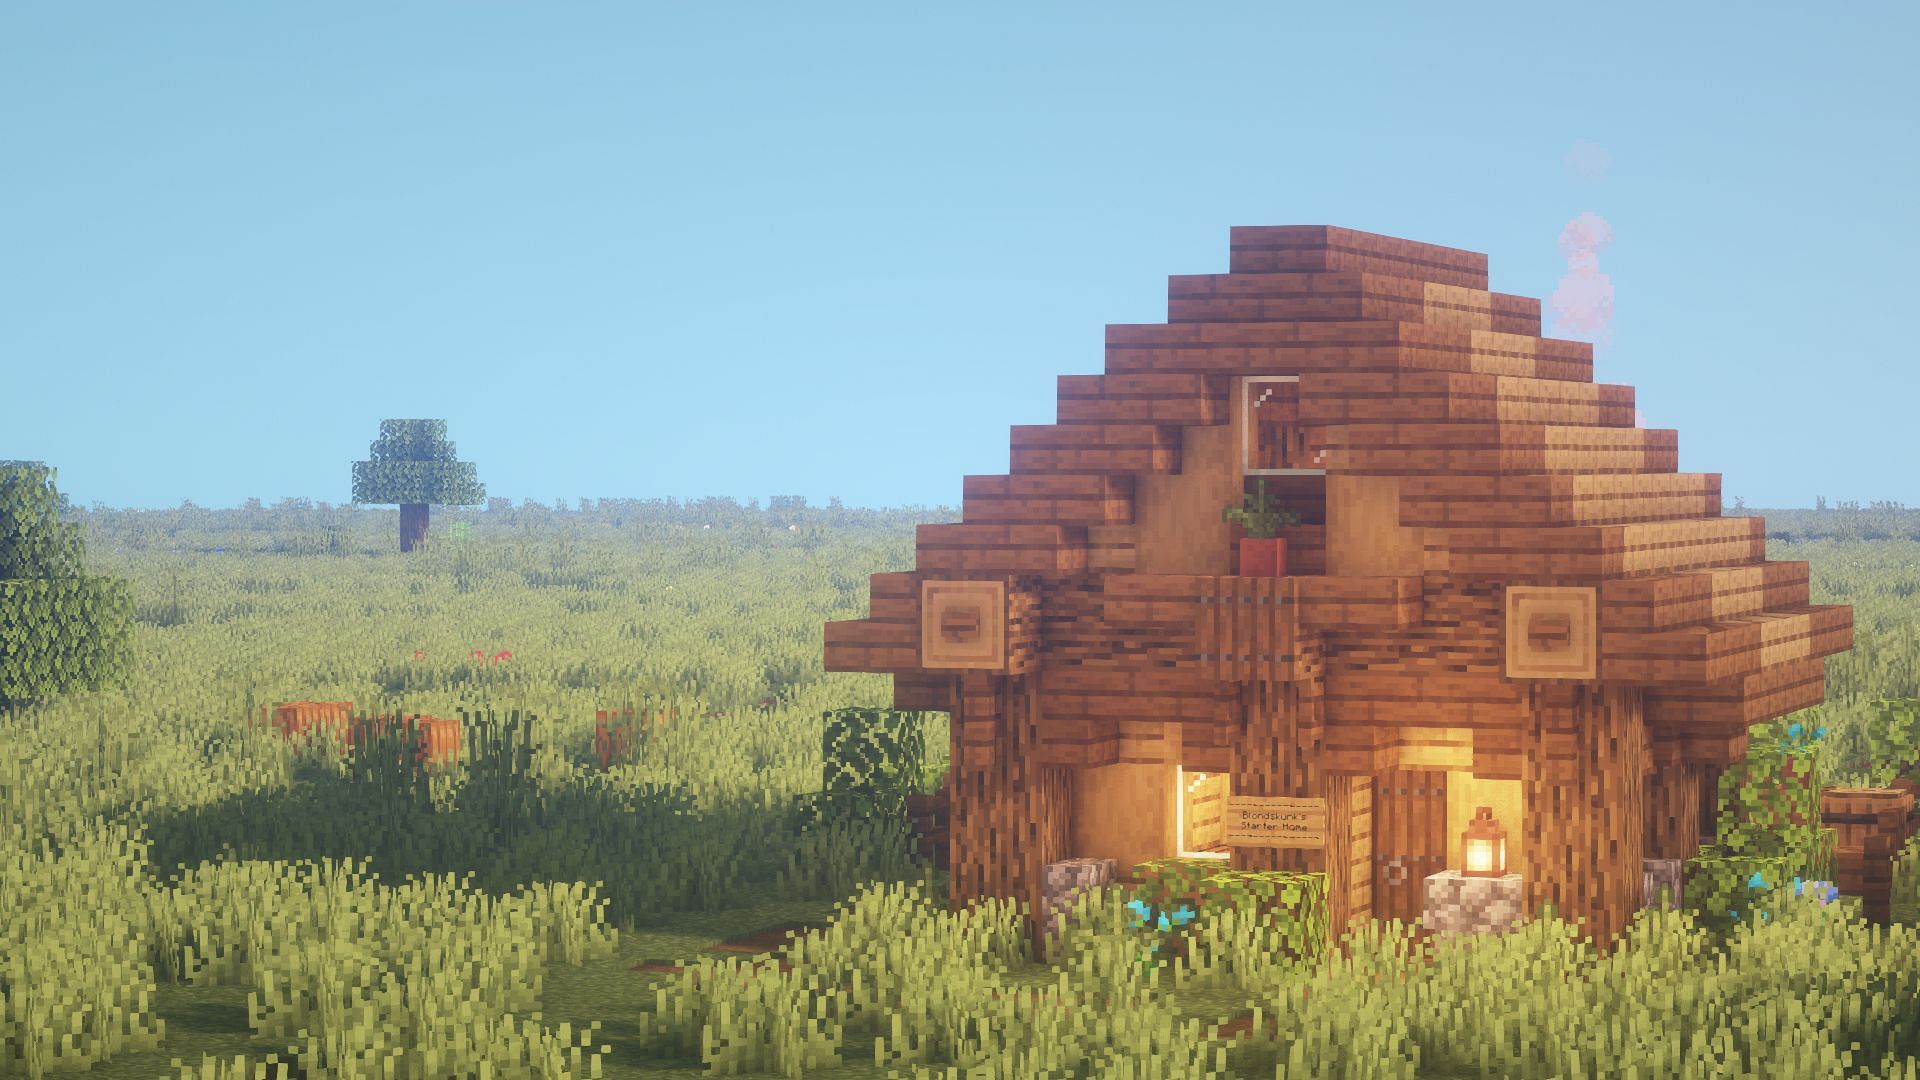 One of the most iconic house design is a simple small hut in Minecraft (Image via Reddit/Blondskunk)